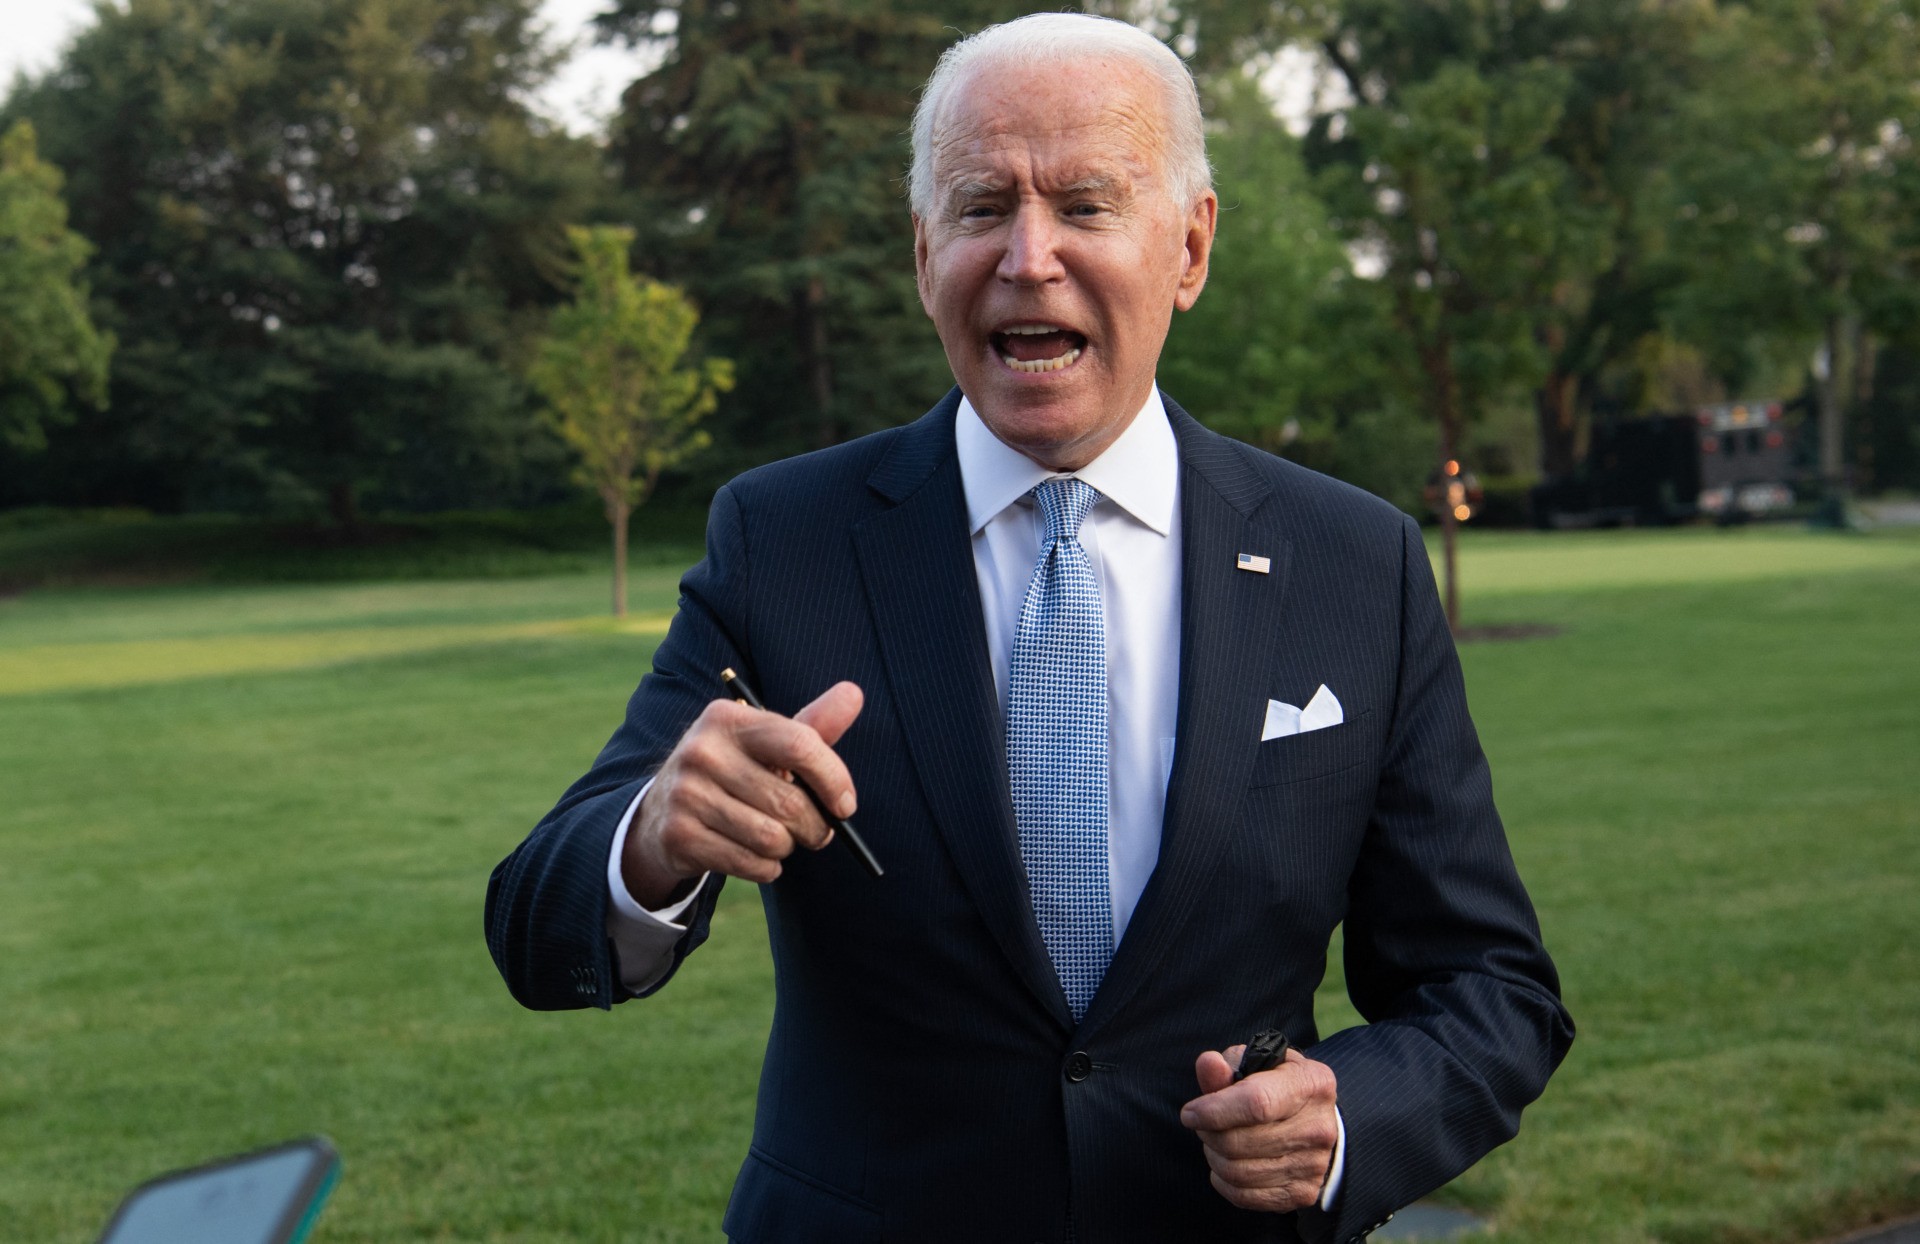 US President Joe Biden speaks to the media as he walks to Marine One prior to departure from the South Lawn of the White House in Washington, DC, July 29, 2021, as he travels to Walter Reed National Military Medical Center in Maryland where First Lady Jill Biden is having a medical procedure. (Photo by SAUL LOEB / AFP) (Photo by SAUL LOEB/AFP via Getty Images)